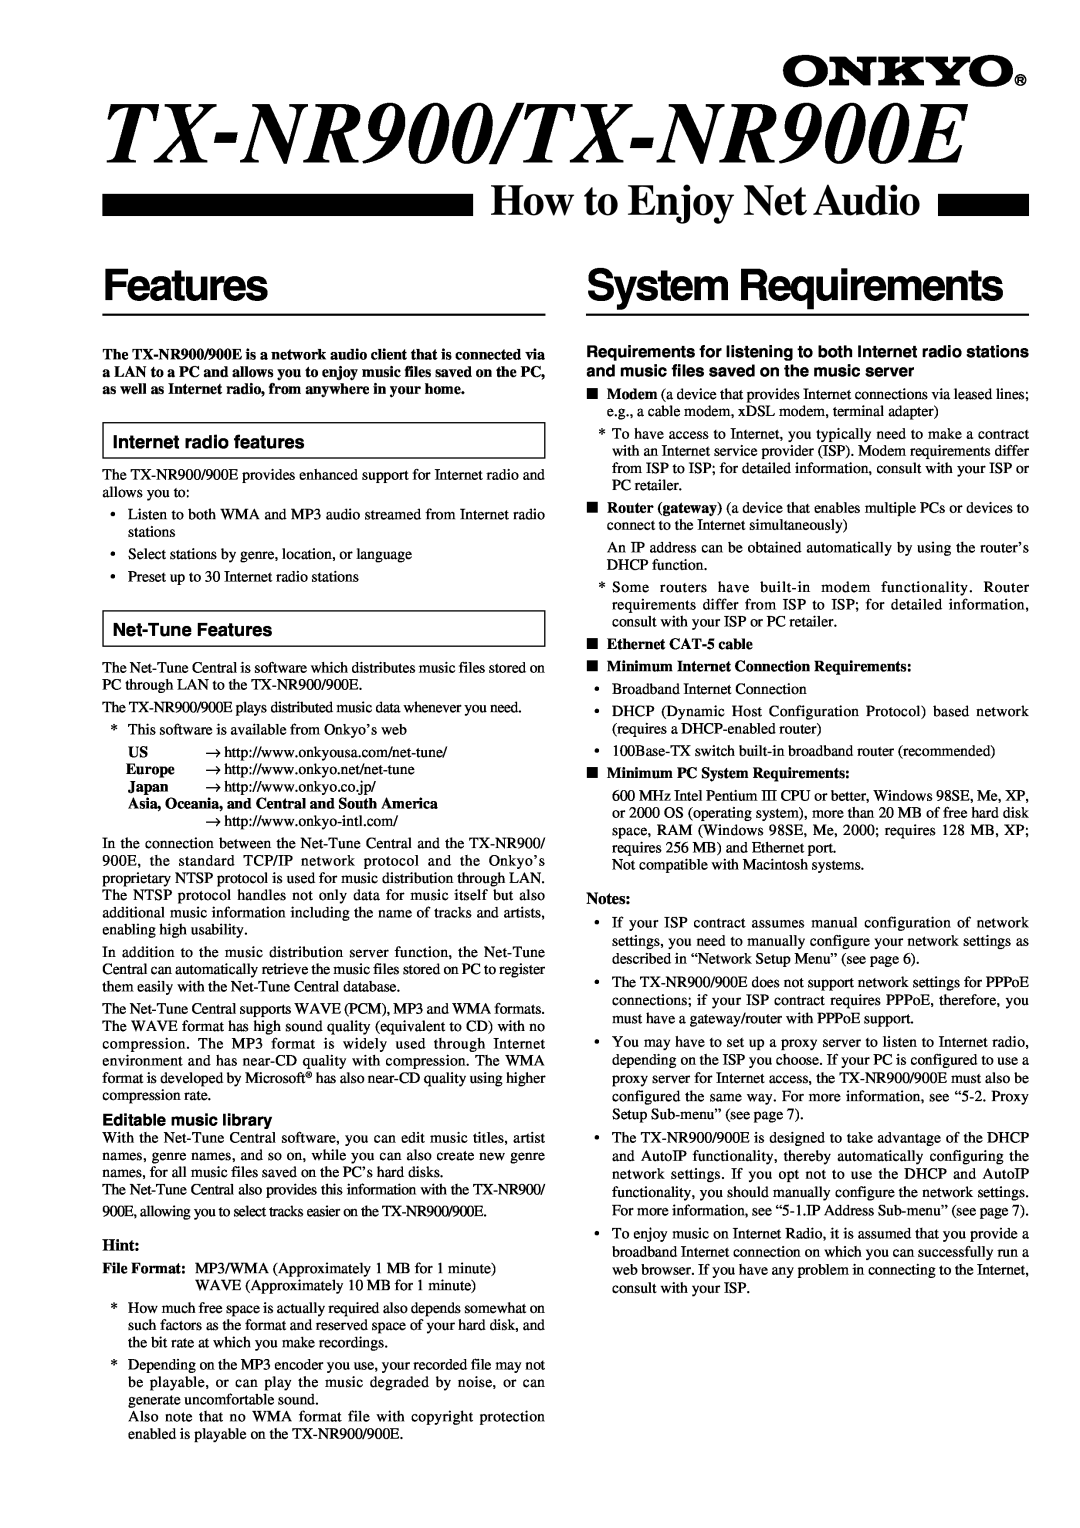 Onkyo instruction manual TX-NR900 TX-NR900E, Instruction Manual, AV Receiver, Contents, Before using, Remote controller 